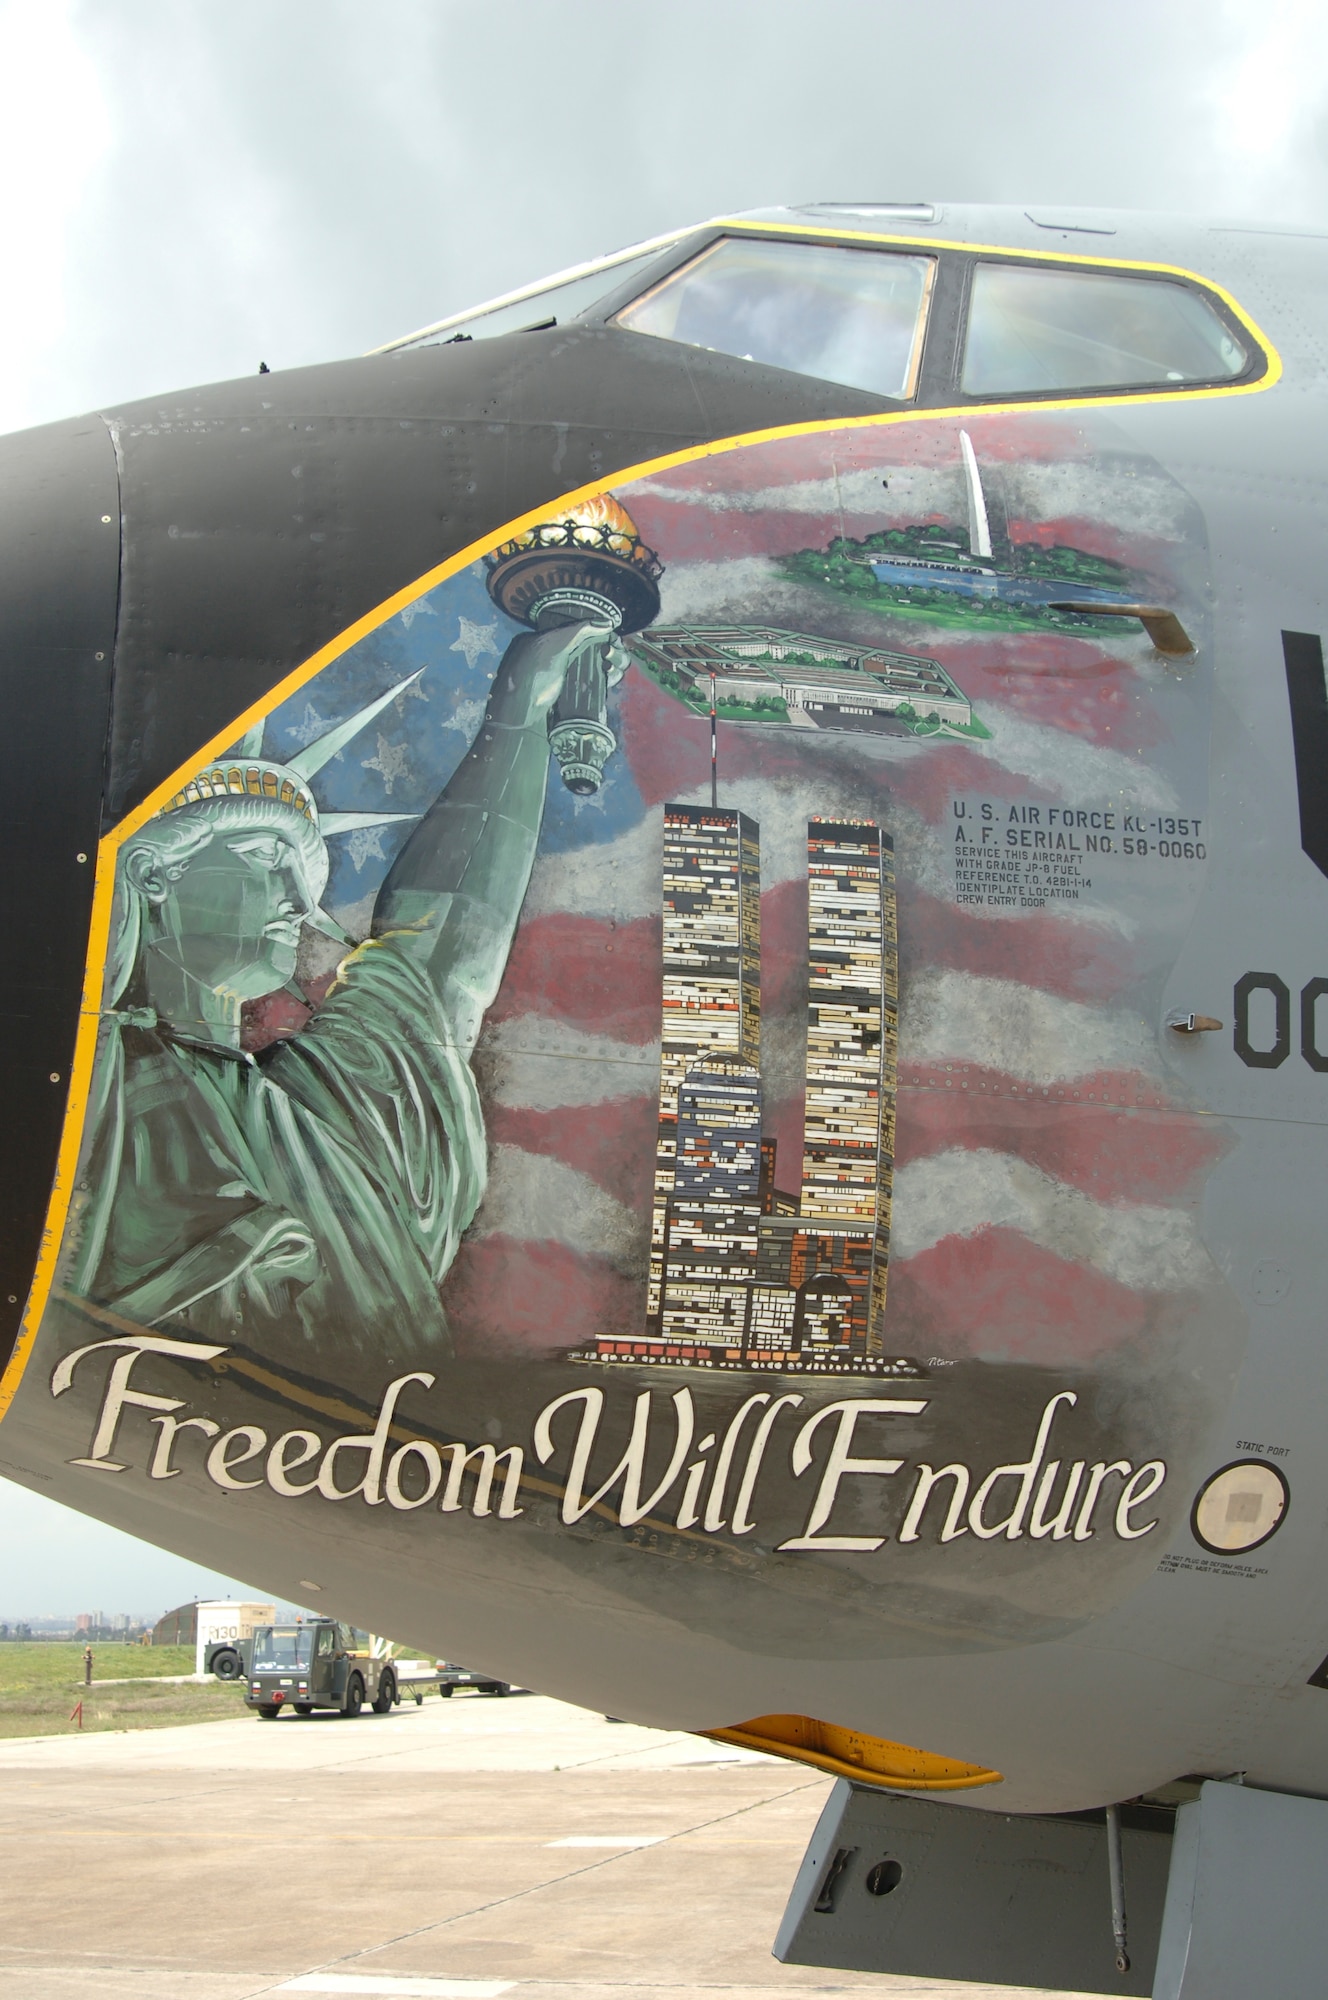 After the nose art ban was lifted sometime around 1998, and within two weeks of joining the 171st Air Refueling Wing, Colonel Hess began the search for an artist to brighten up the unit’s fleet of KC-135s. ( U. S. Air Force Photo by Staff Sgt. Chris Galindo) 
